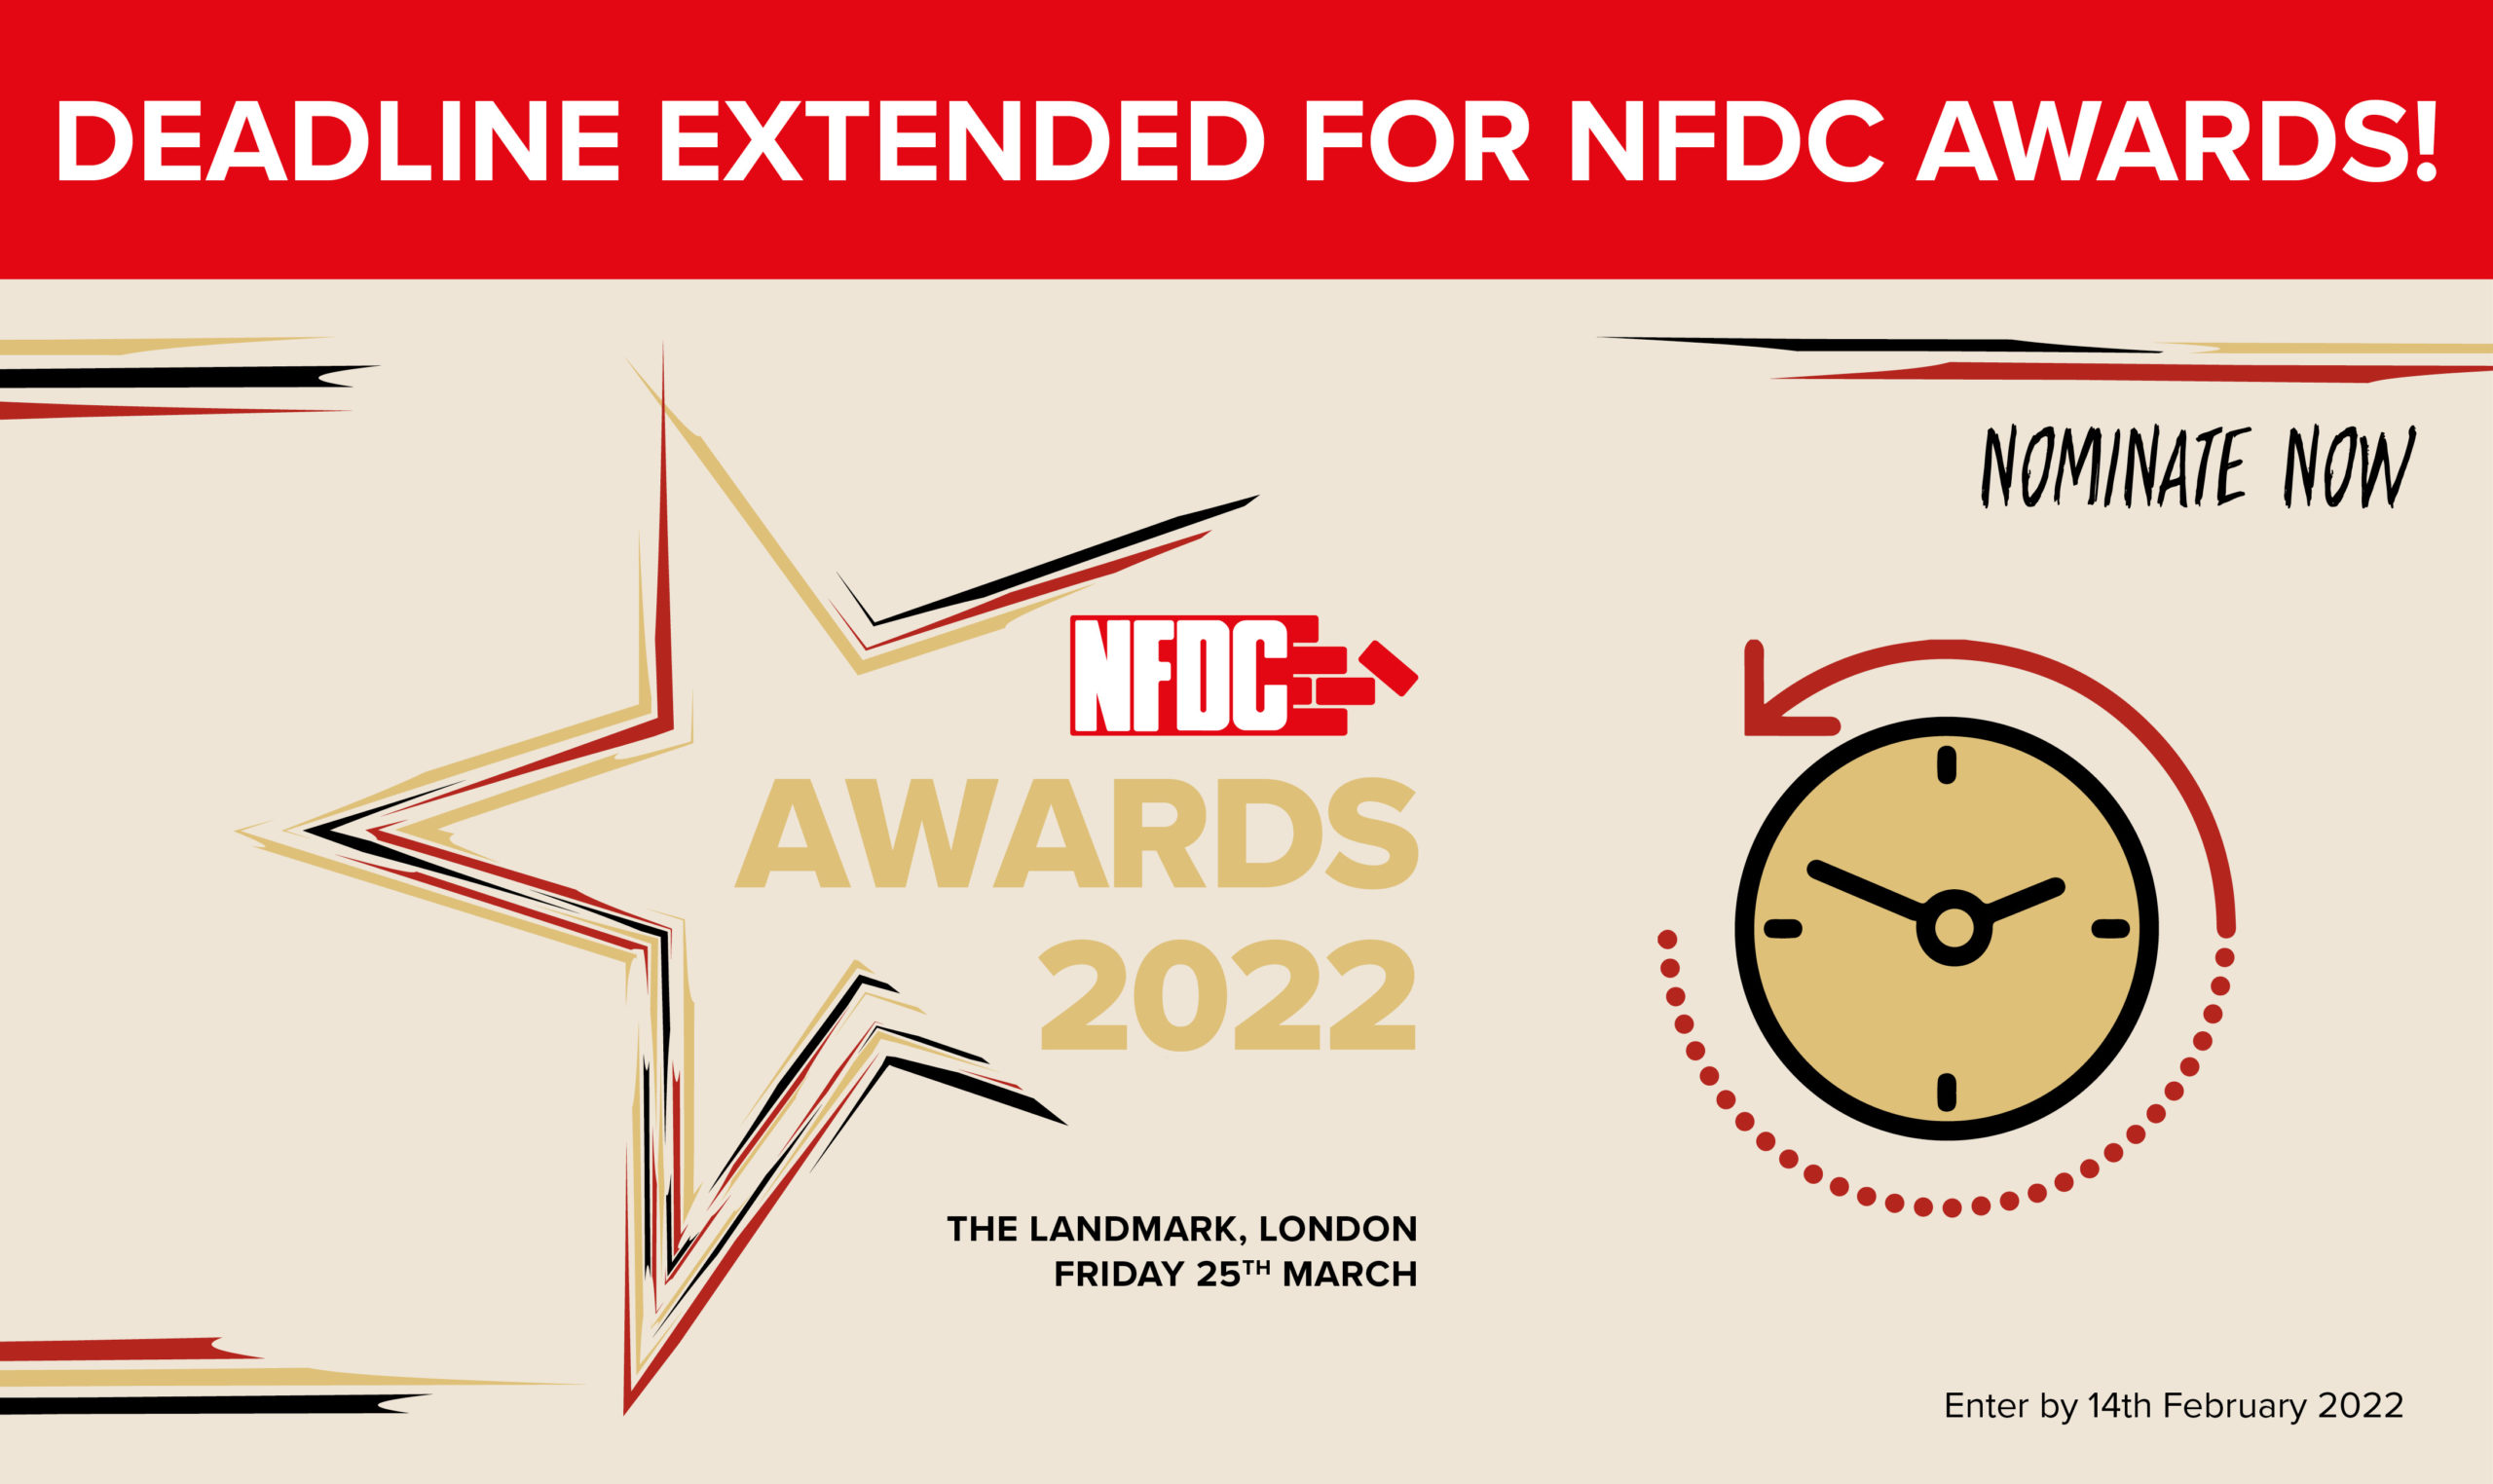 NFDC Adds Another Week on the Clock for Awards Submissions